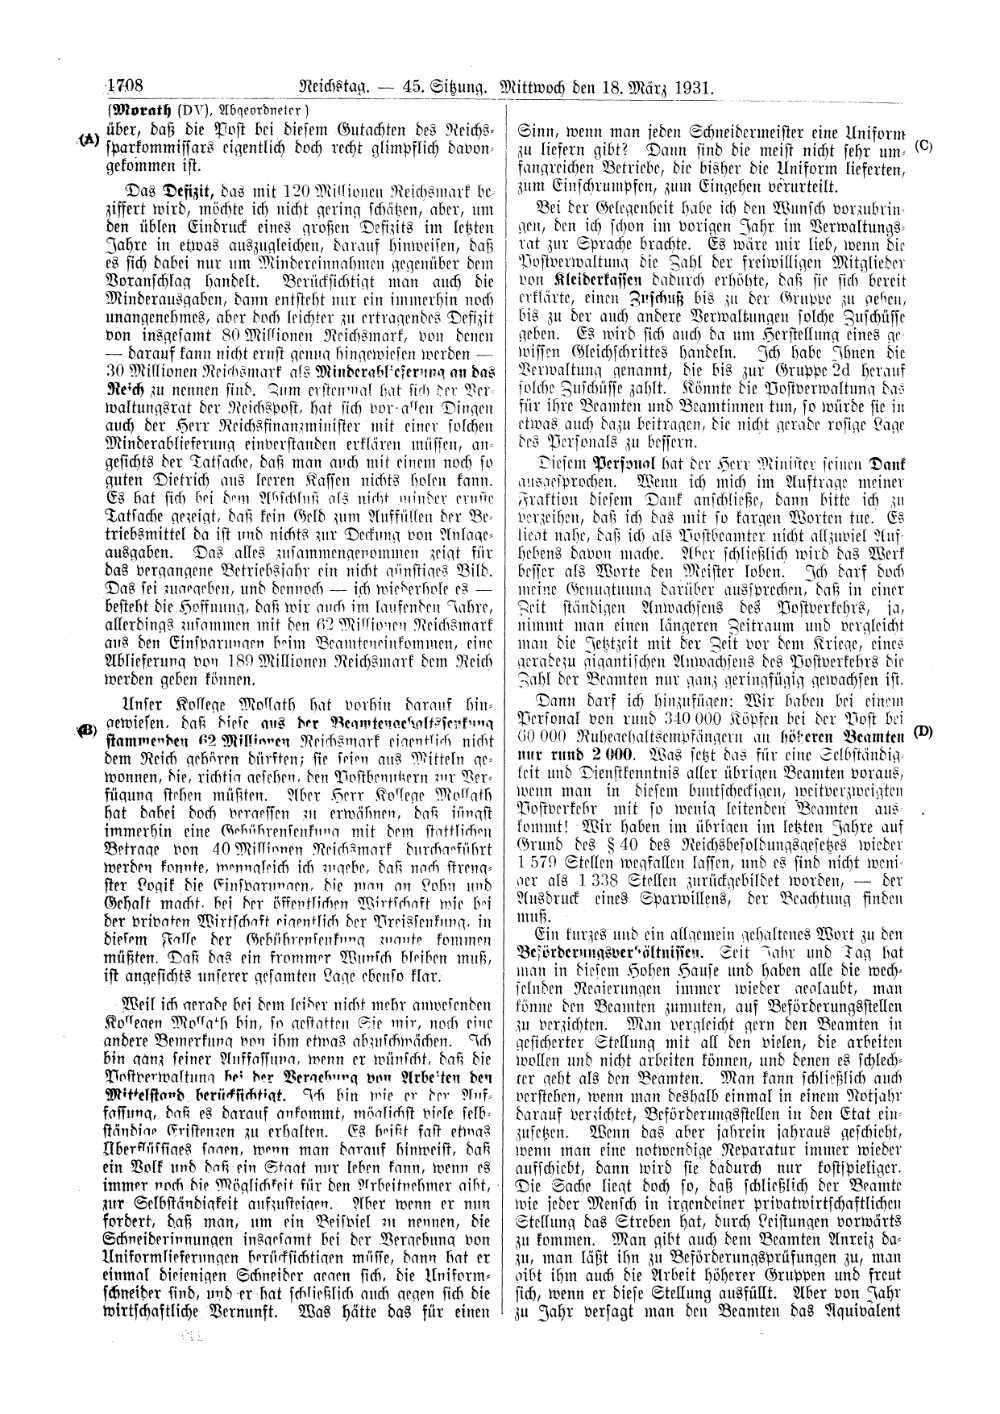 Scan of page 1708